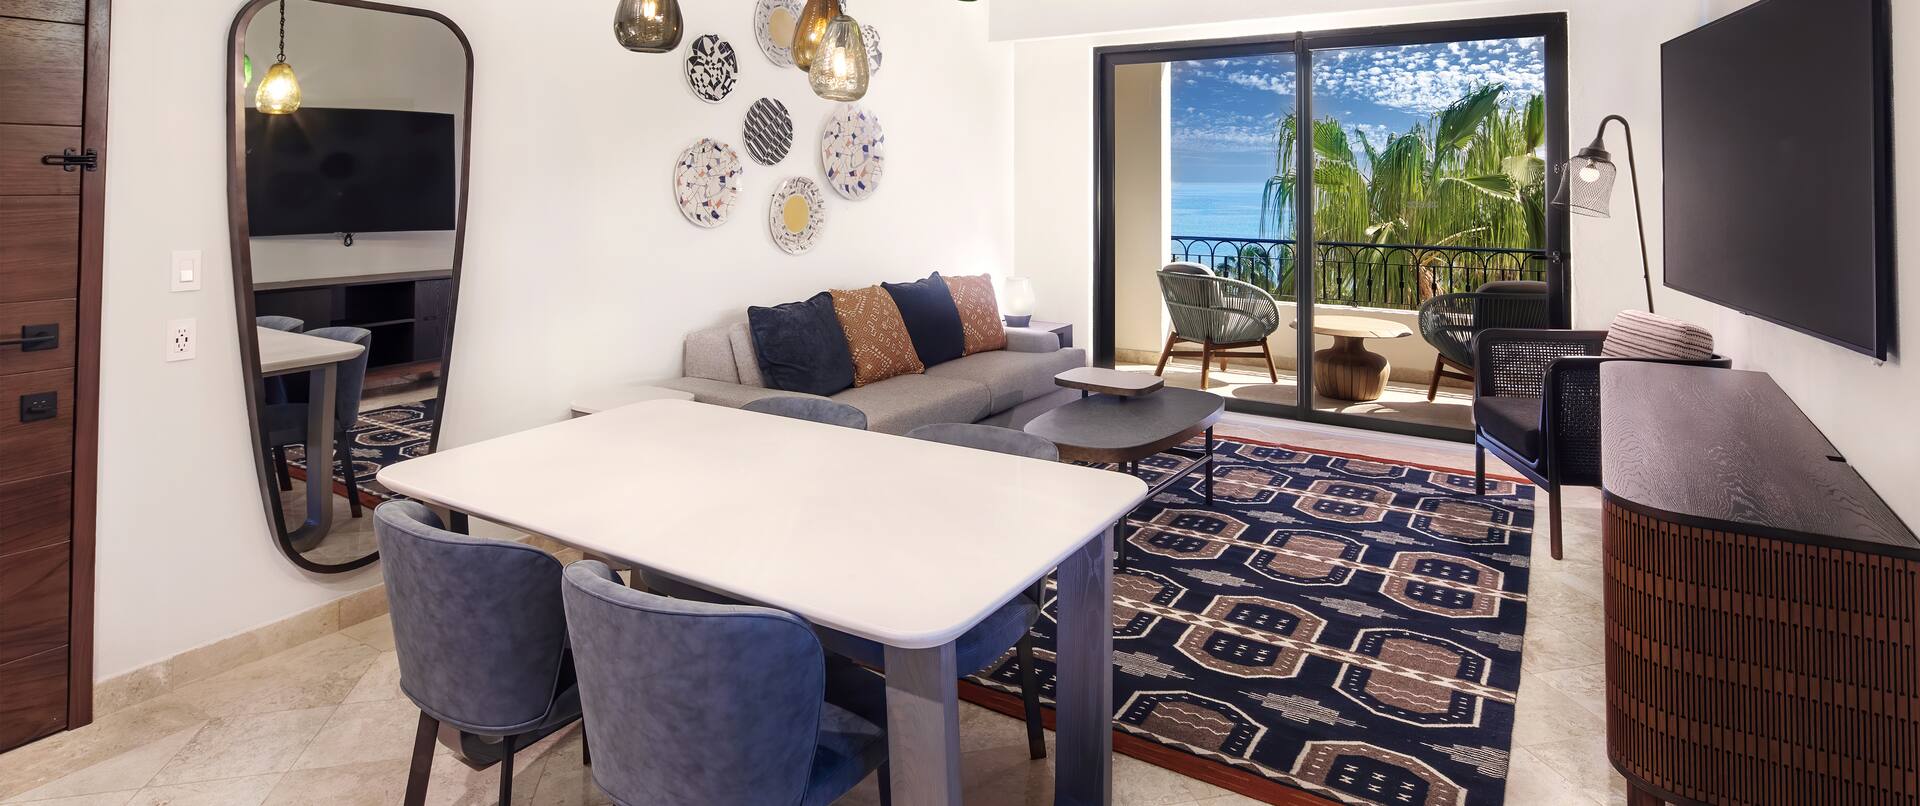 Living Area with Table and Chairs HDTV and Balcony with Ocean View